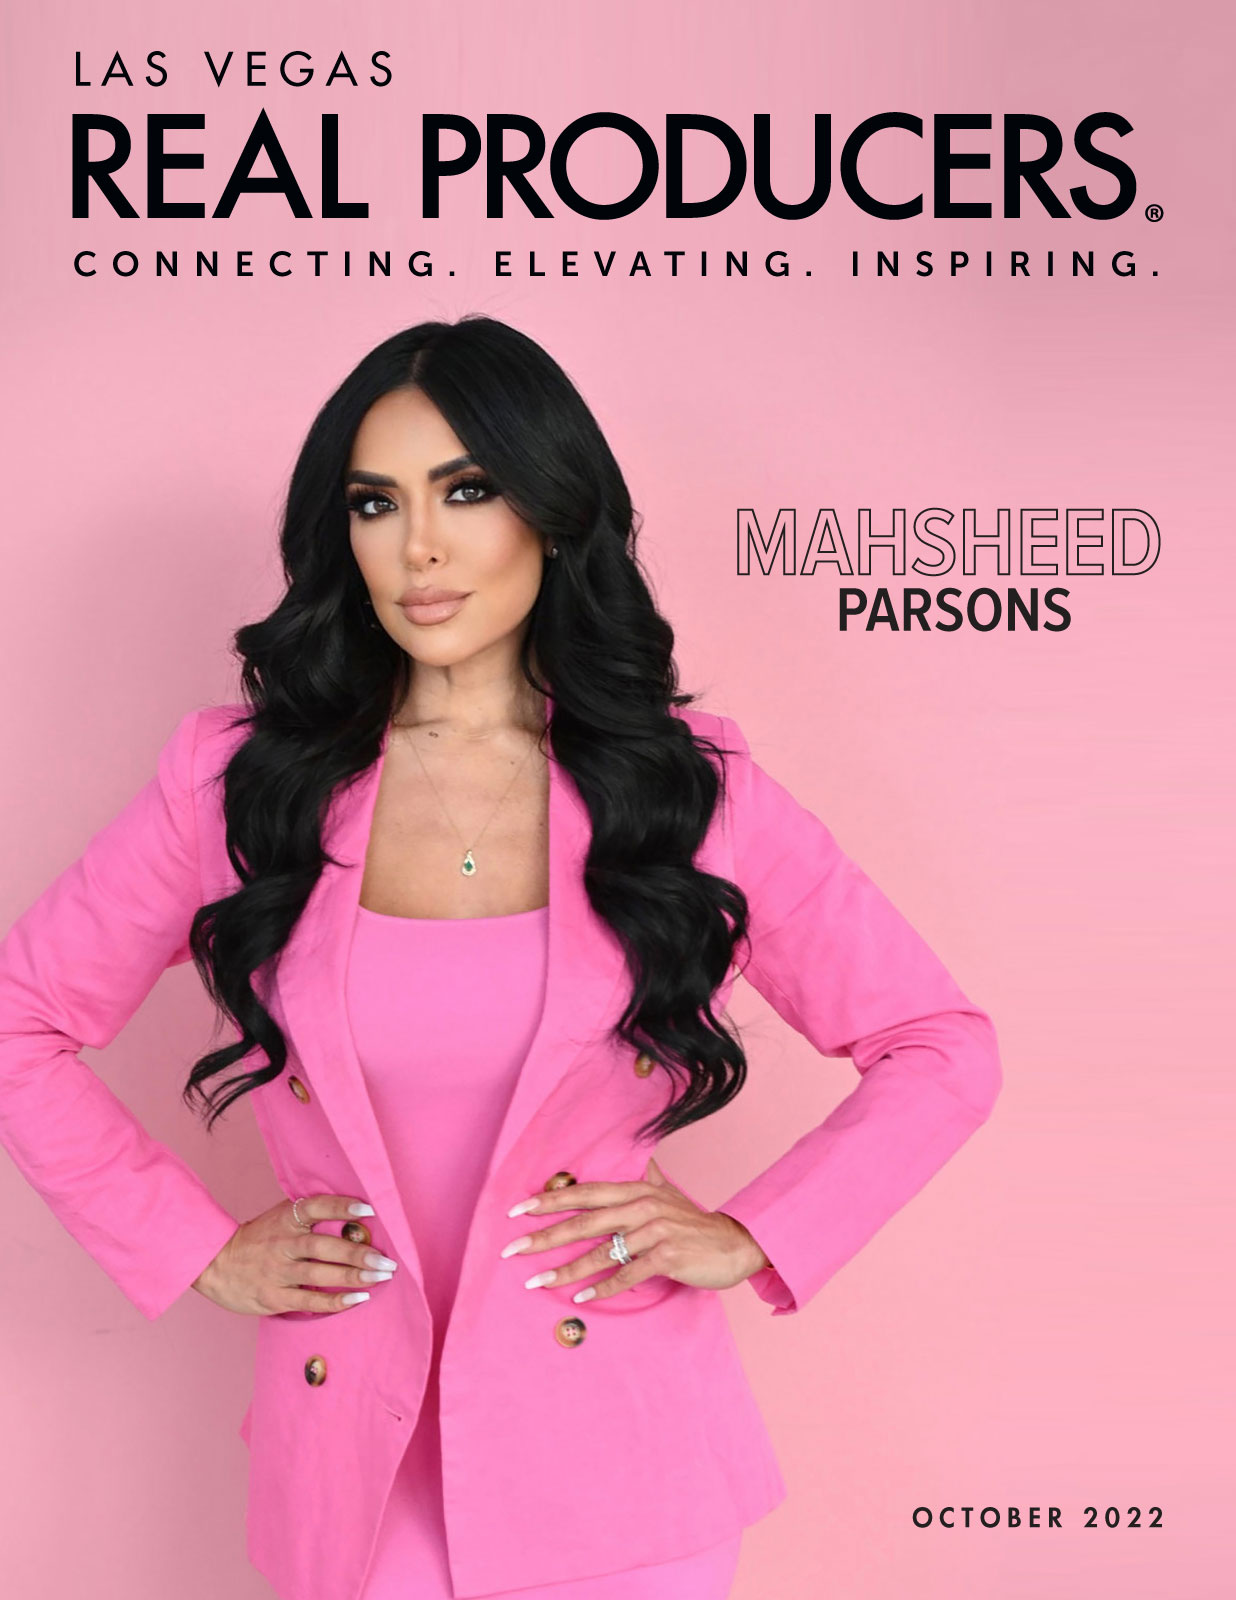 Las Vegas Real Producers Magazine Cover